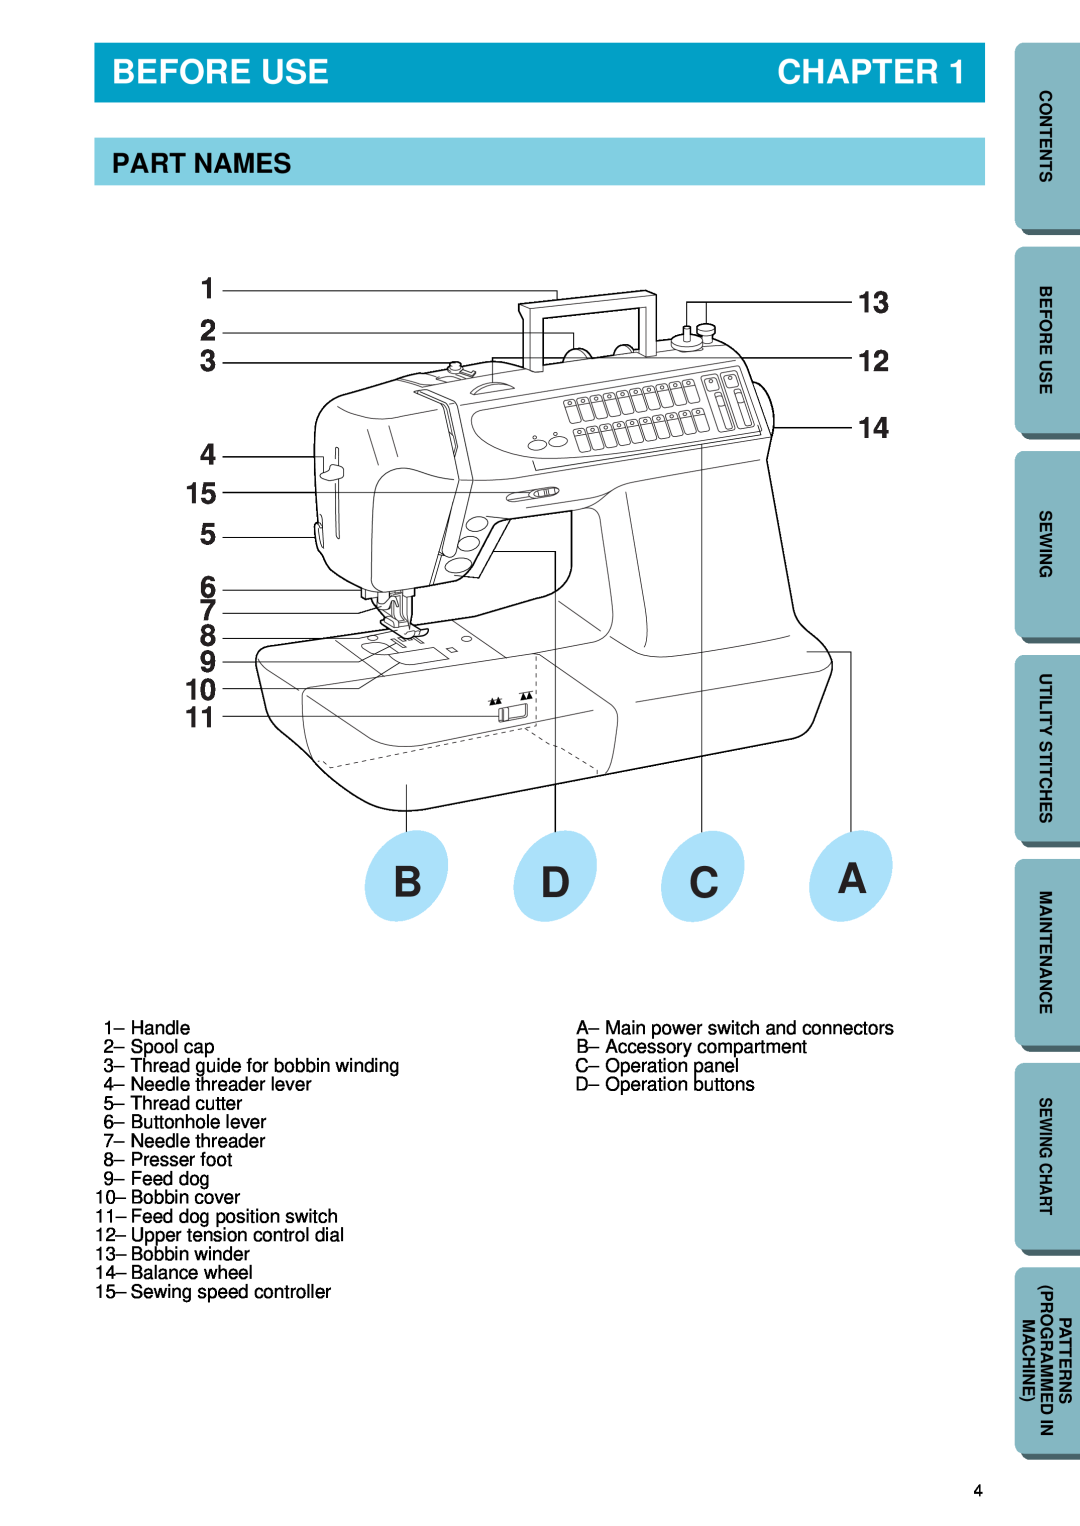 Brother PC-2800 operation manual Before Use, Chapter, Part Names, D C A 